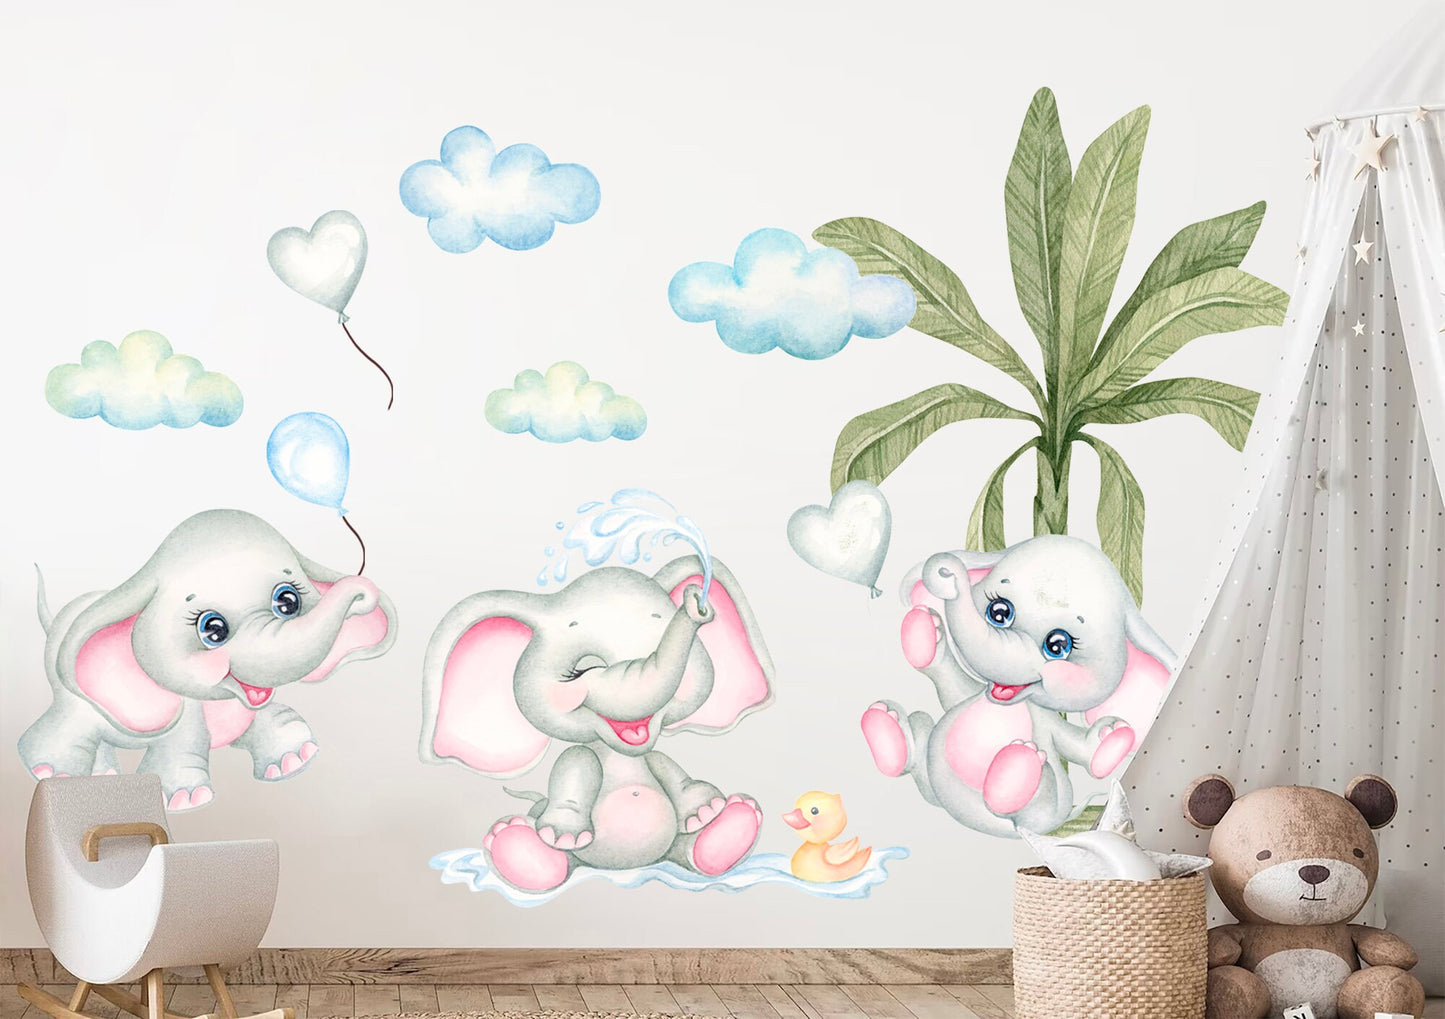 Baby Elephants Playing with Balloons and Water under Coconut Tree Removable Nursery Wall Decal - BR393